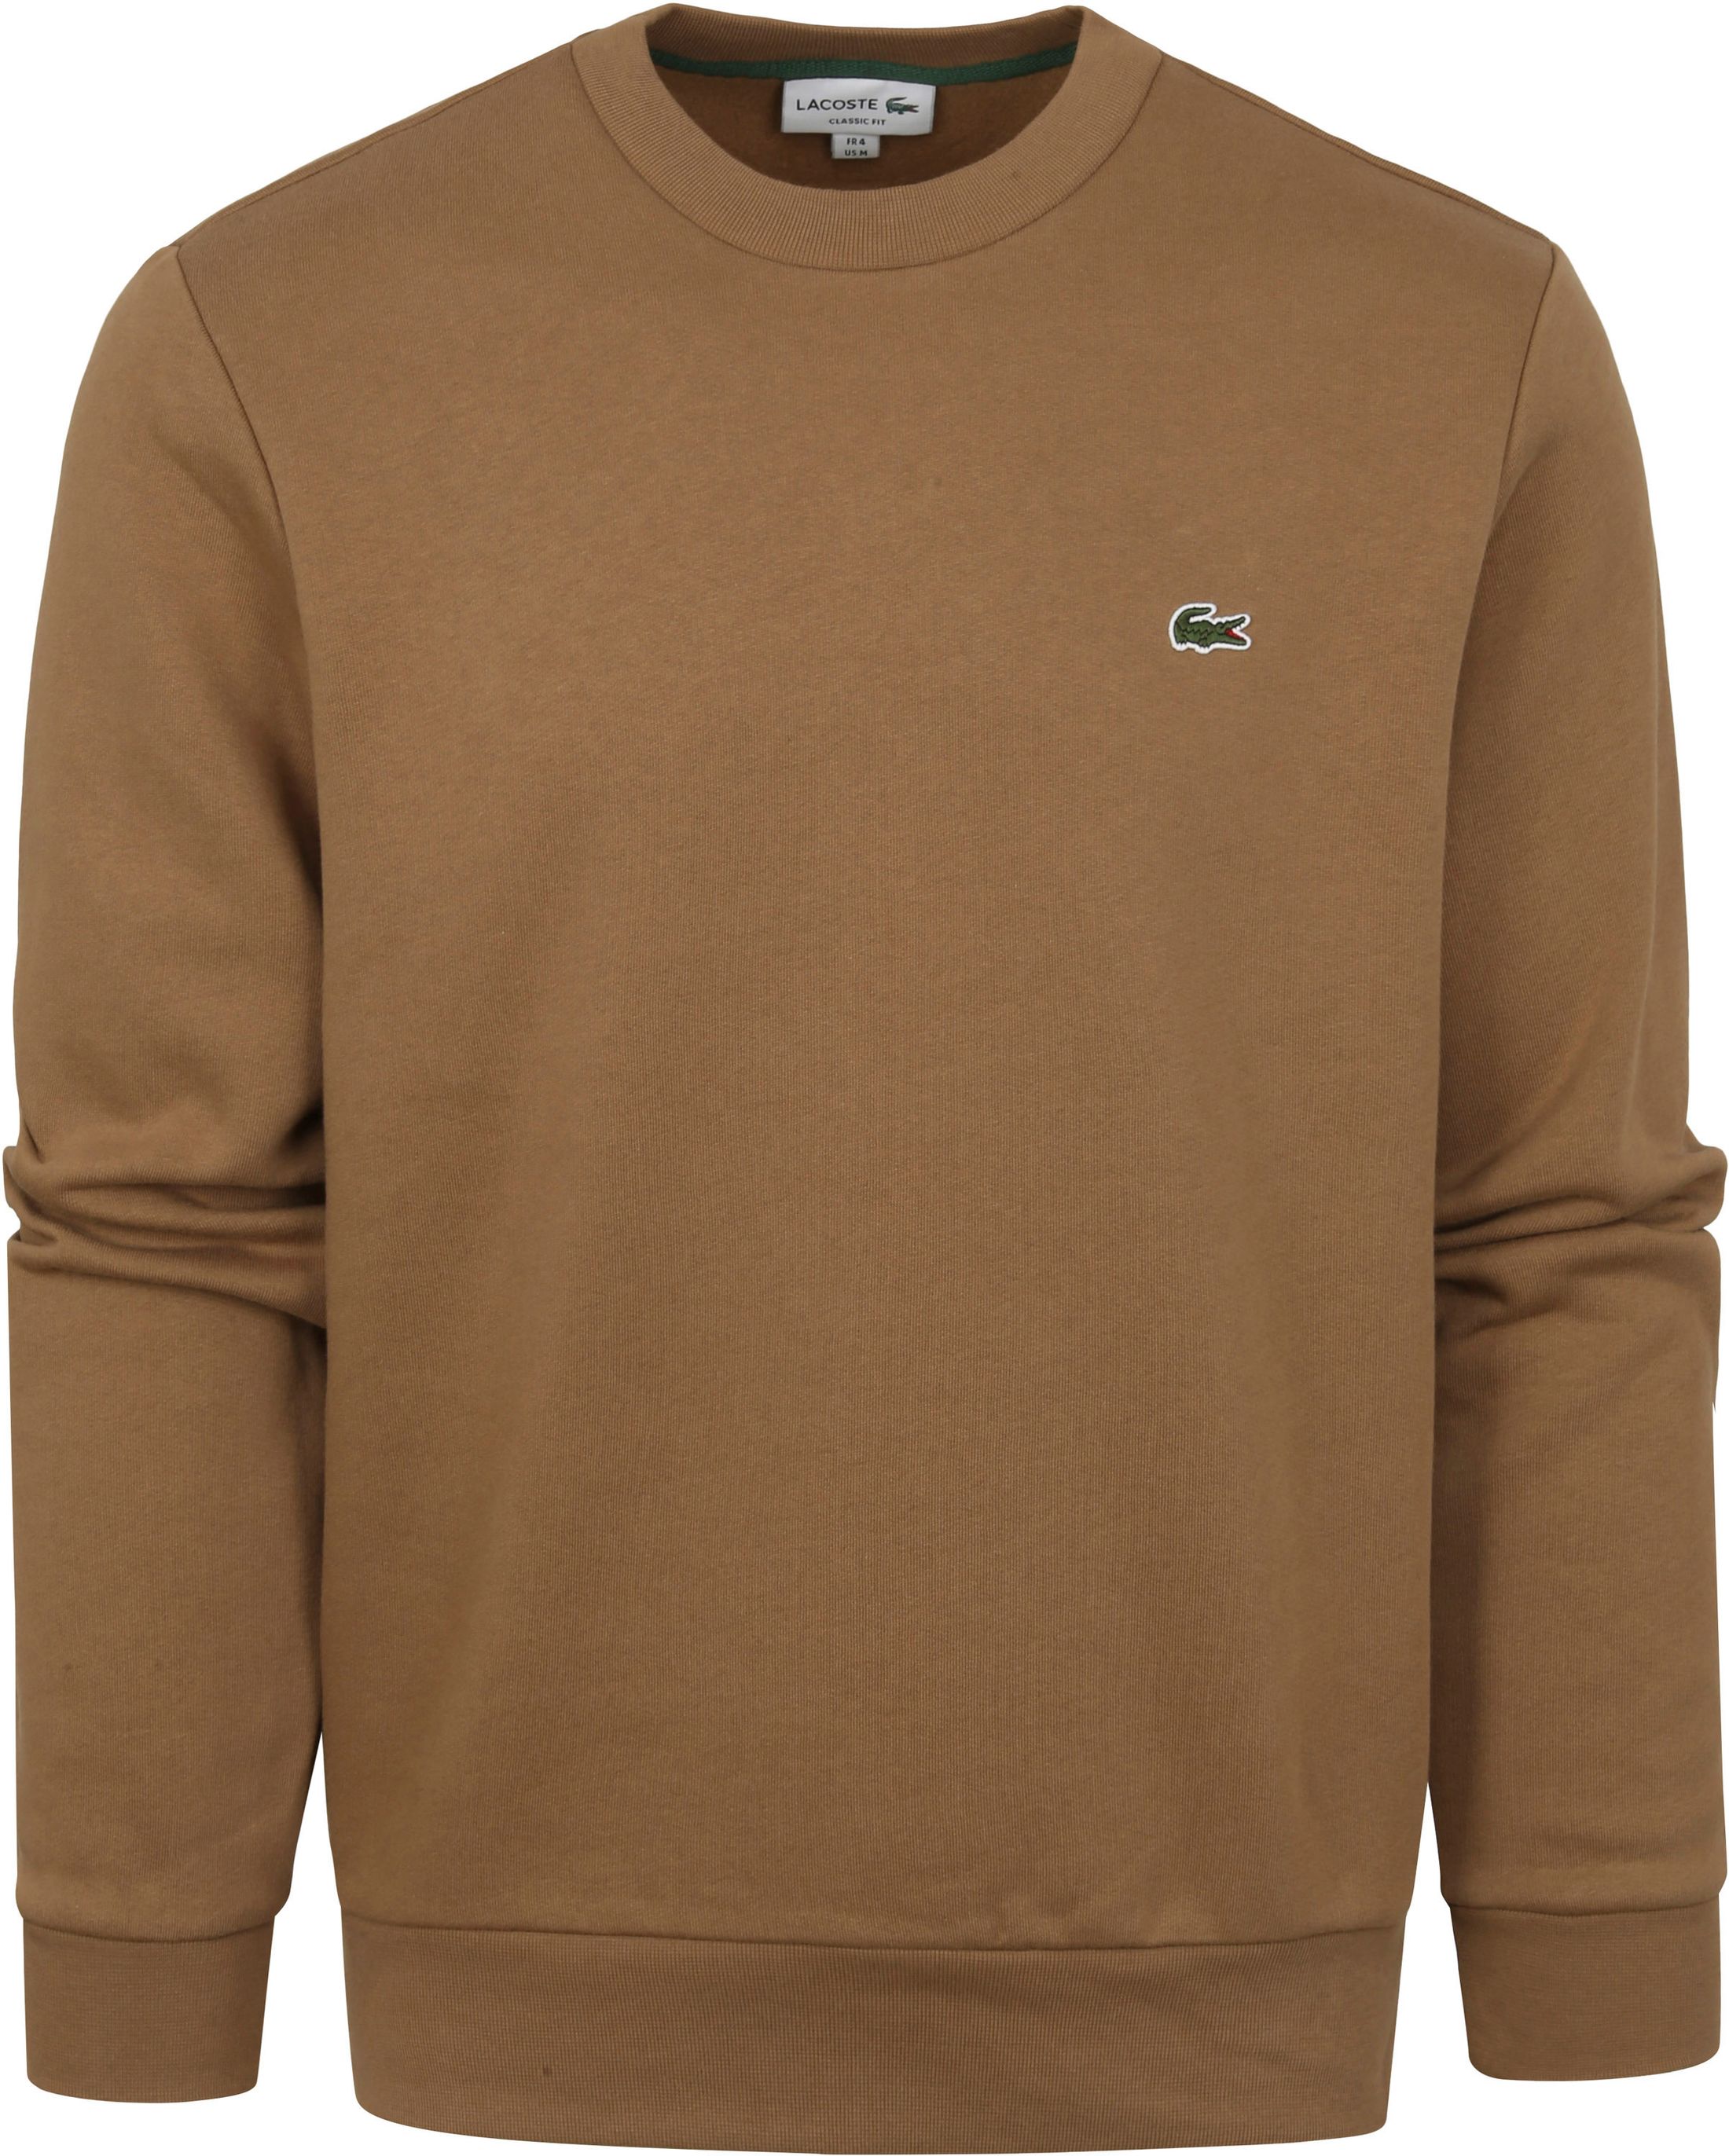 Lacoste Sweater O-neck Beige Brown size L